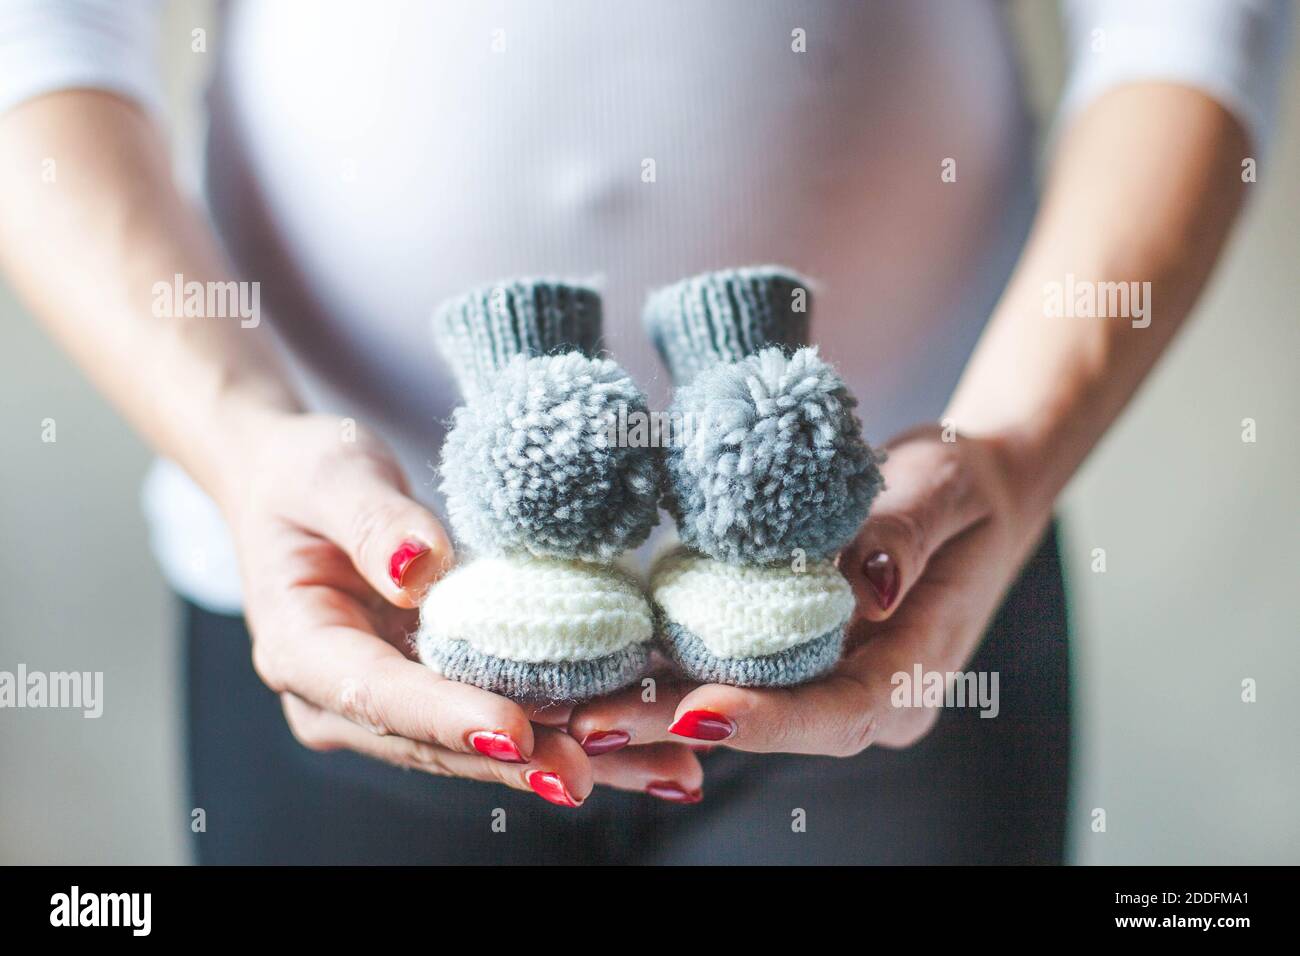 Closeup of a pregnant woman holding knitted baby socks. Coming soon concept. Expecting mother in the last trimester. Stock Photo